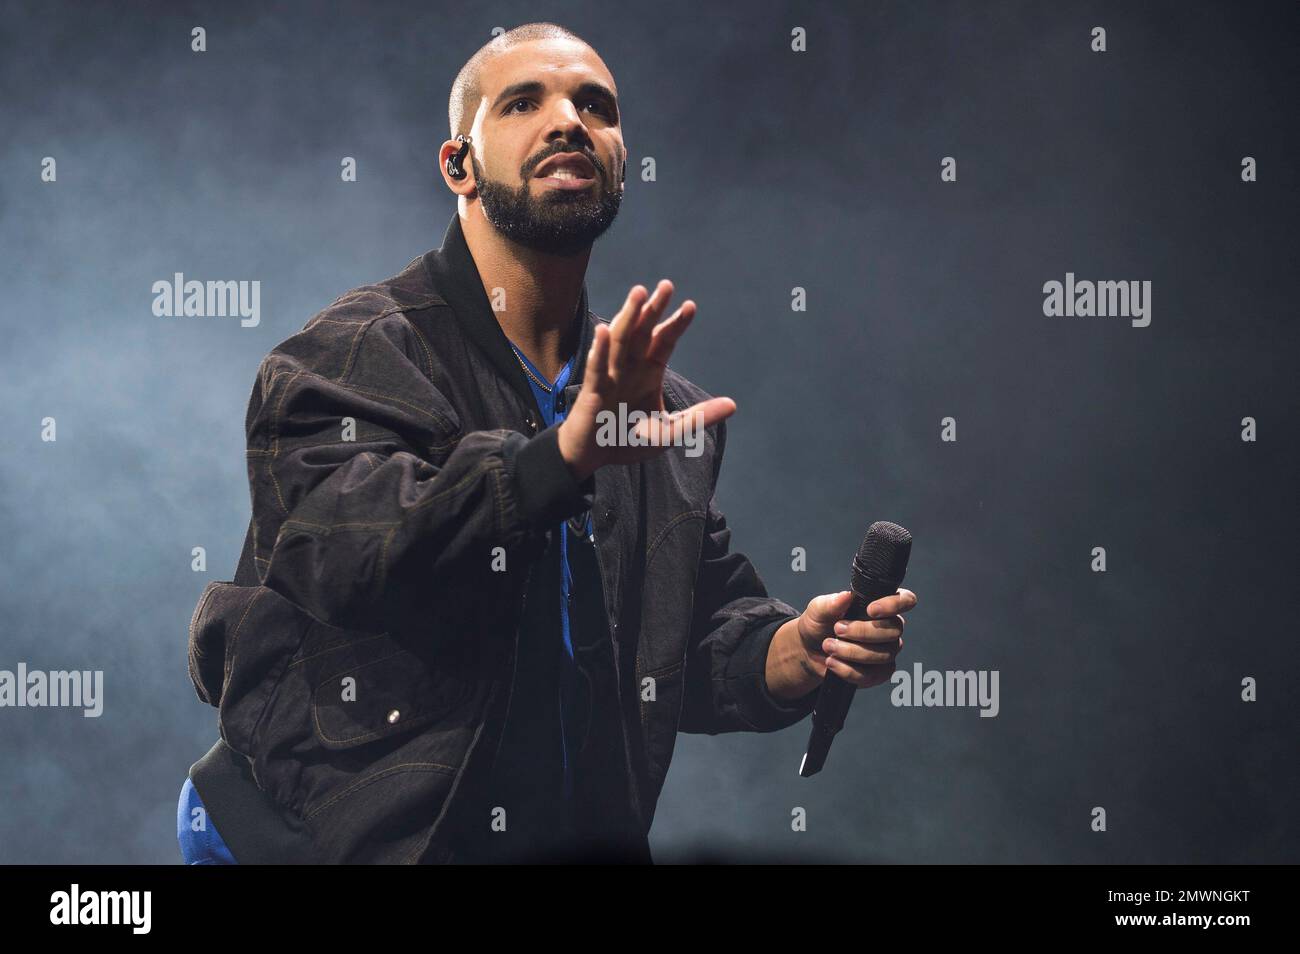 FILE - In this Oct. 8, 2016 file photo, Drake performs onstage in Toronto. Drake leads the nominations for the 2017 iHeartRadio Music Awards with 12, including male artist of the year, announced Wednesday, Jan. 4, 2017. (Photo by Arthur Mola/Invision/AP, File) Banque D'Images